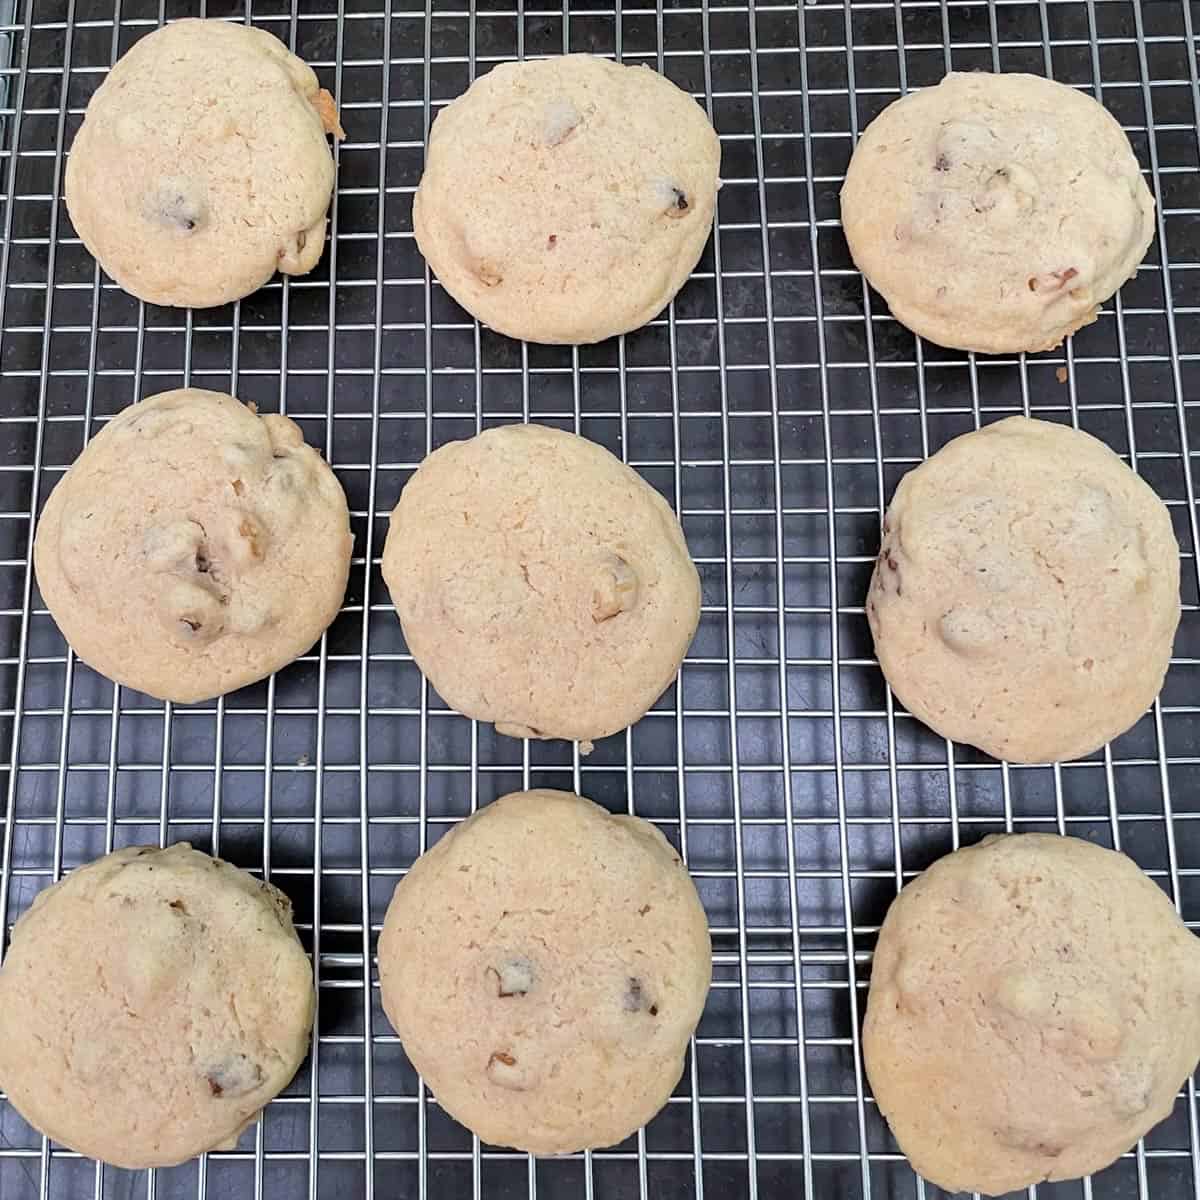 Baked cookies on a wire cooling rack.